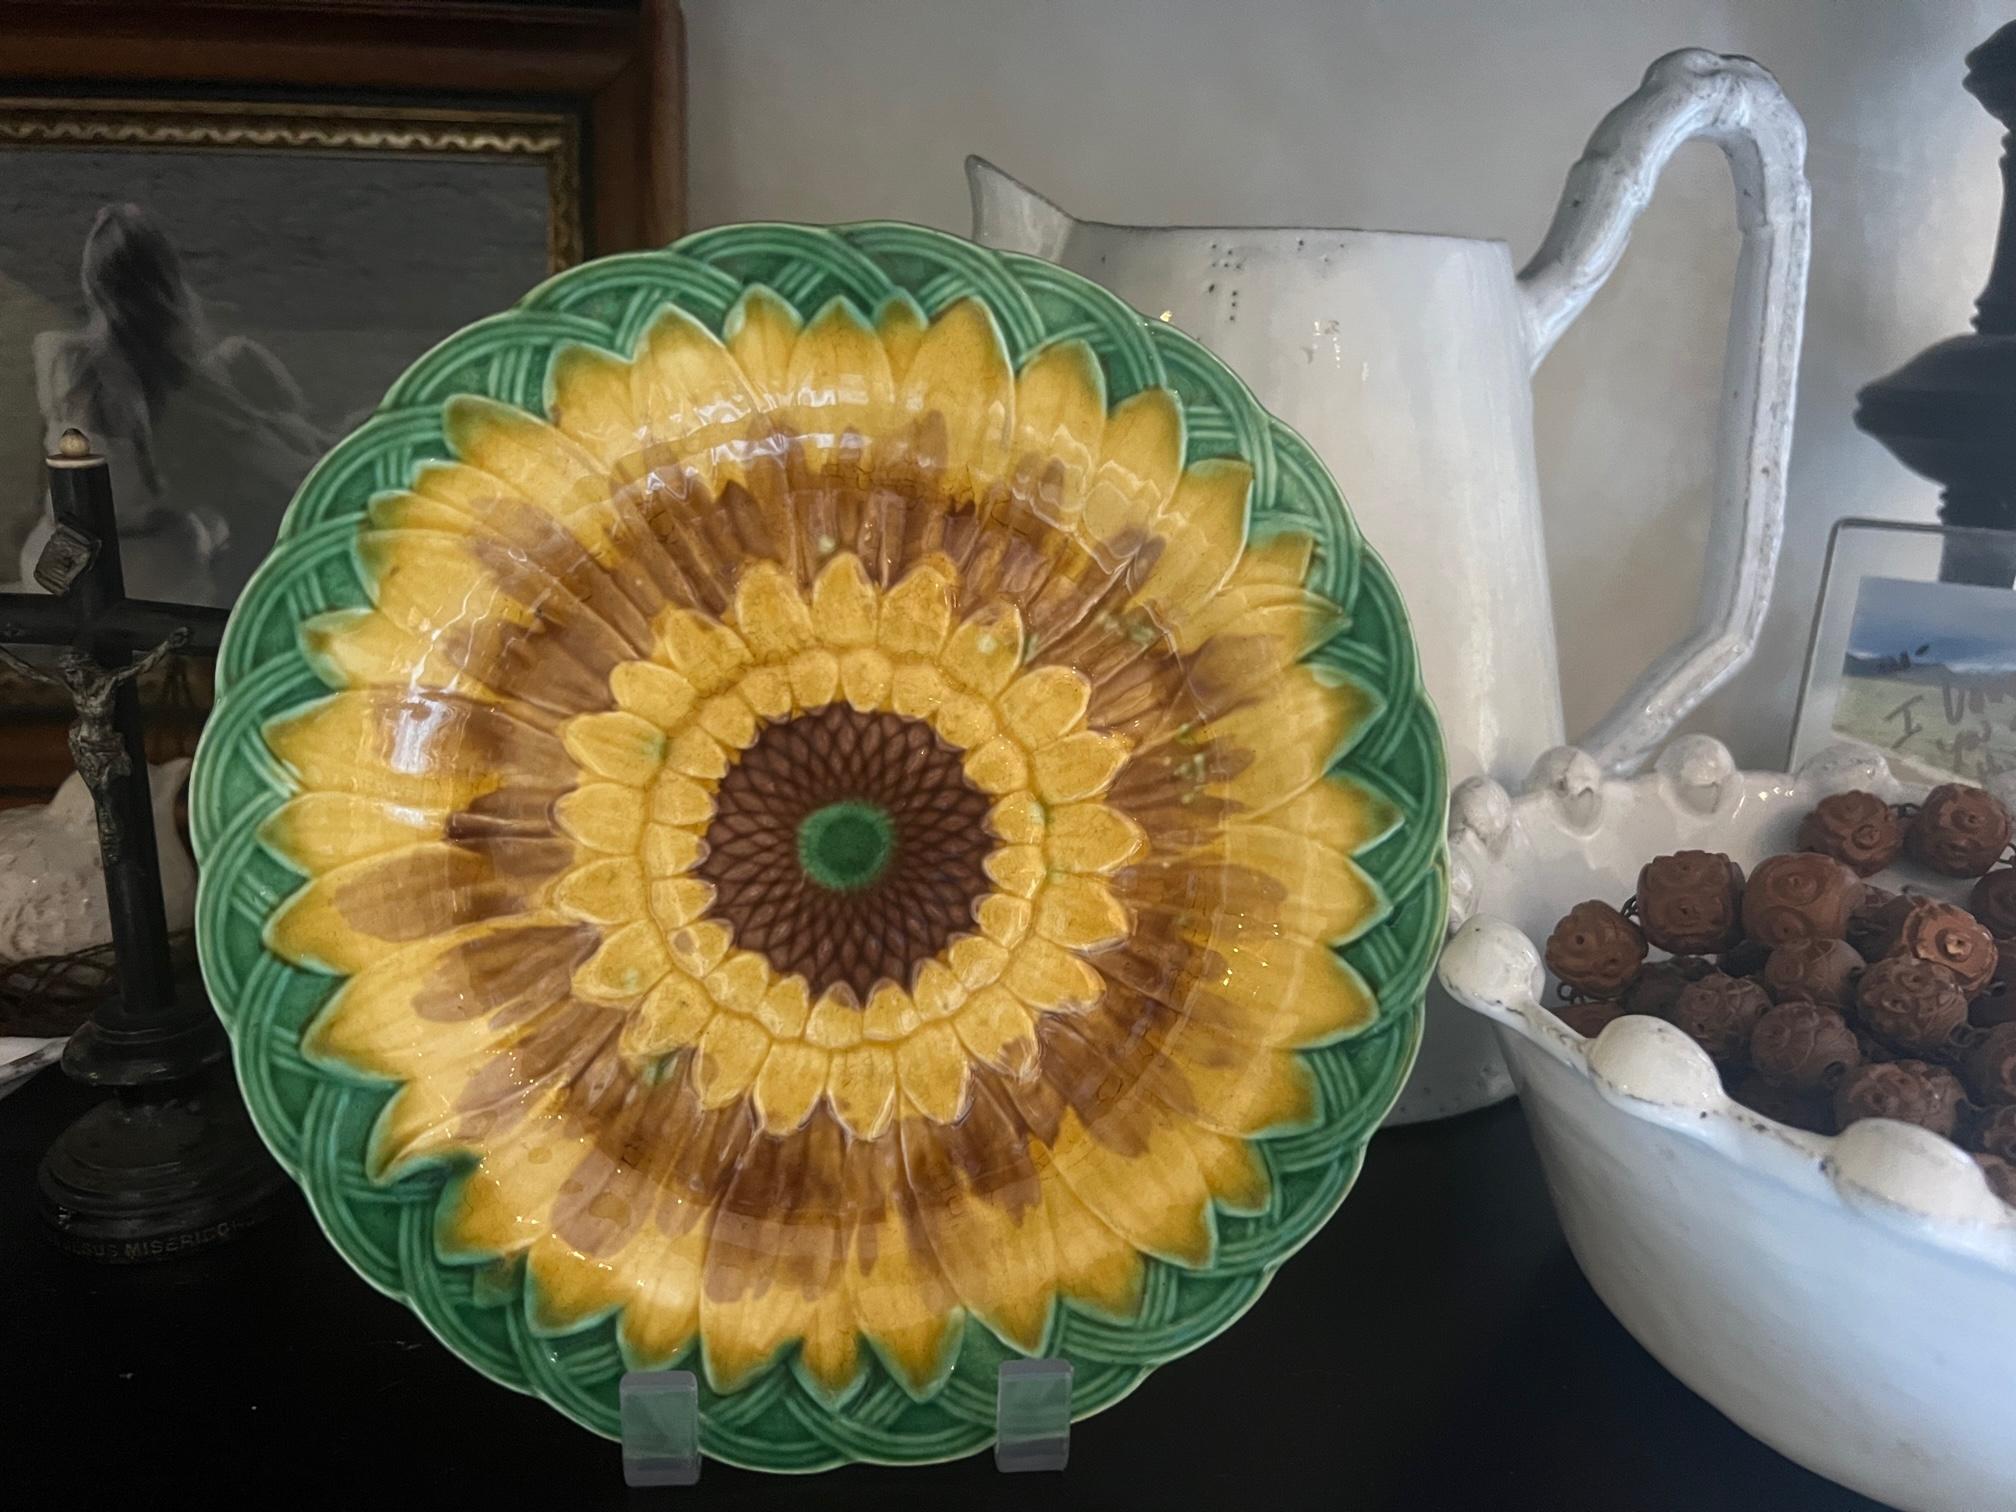 Antique majolica plate made in 1870 by Wedgwood in England. The plate features a vibrant yellow sunflower in a green basket. The Wedgwood hallmark is on the back.